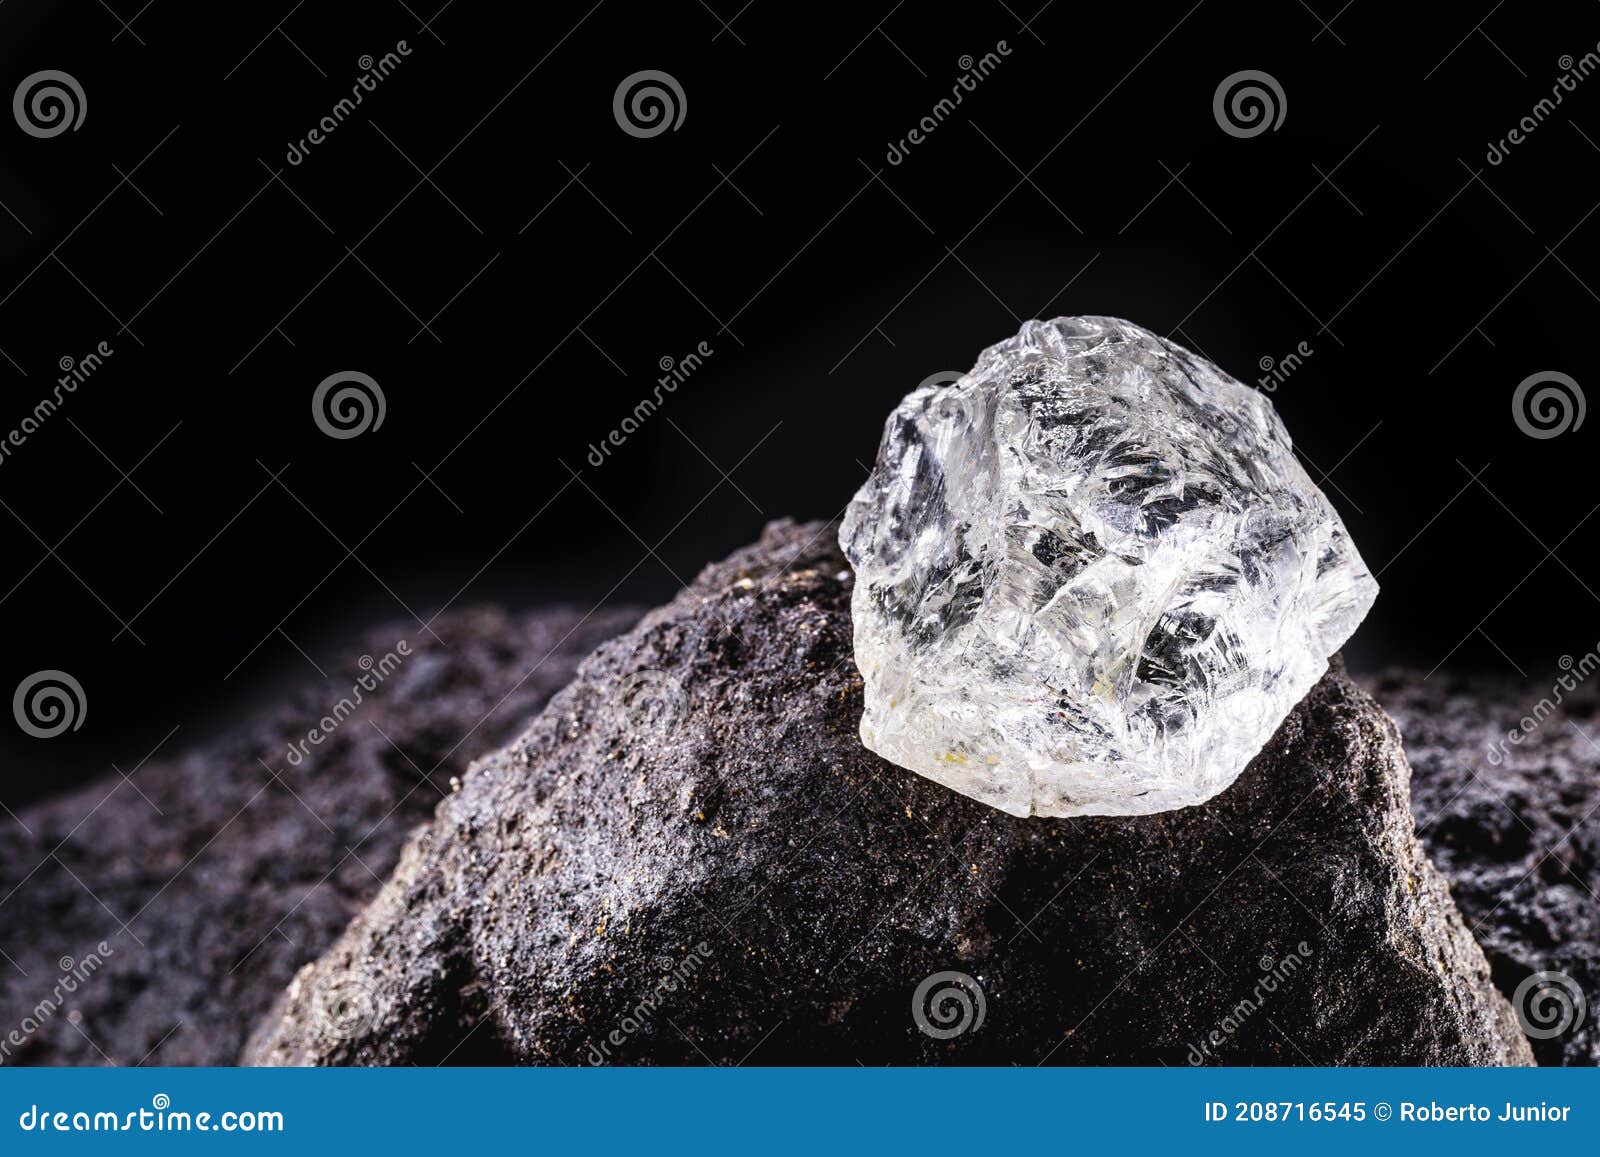 rough diamond  uncut gemstone  mine bottom. concept of mining and extraction of rare ores